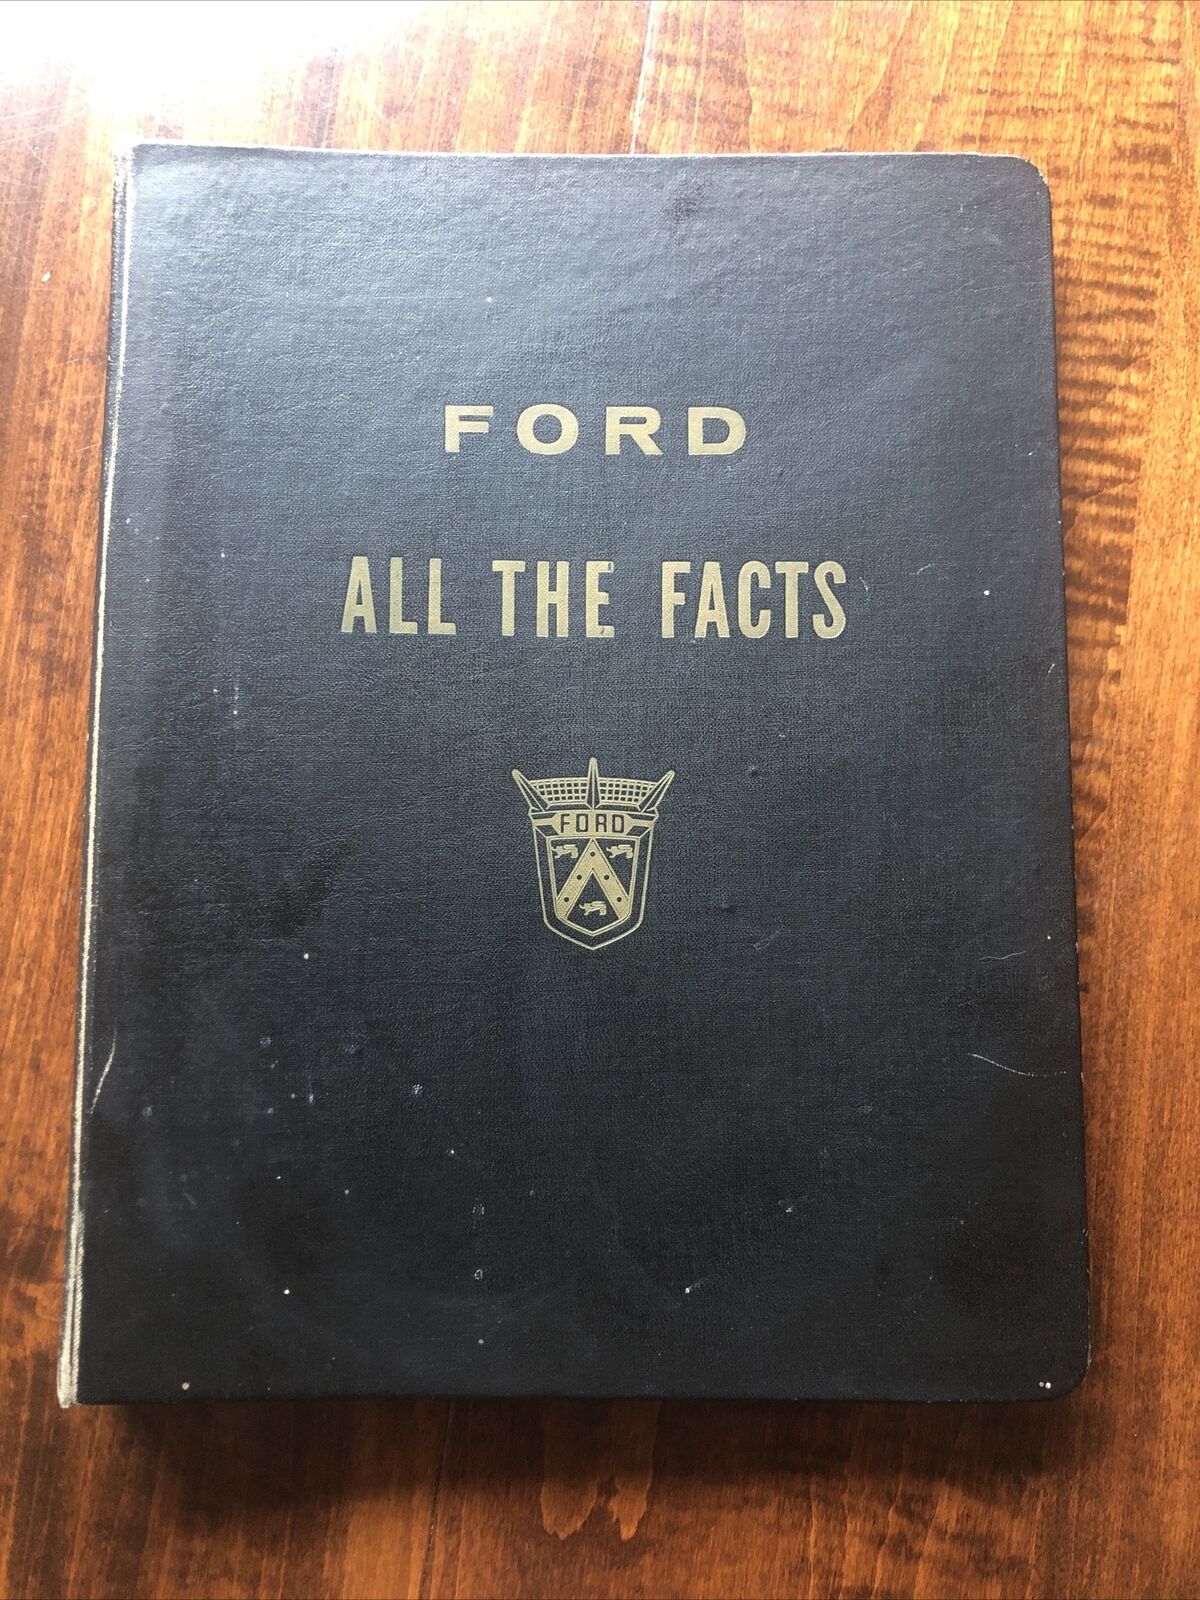 1958 FORD “ALL THE FACTS” Dealer Book. Thunderbird Station Wagon Fairlane Etc.